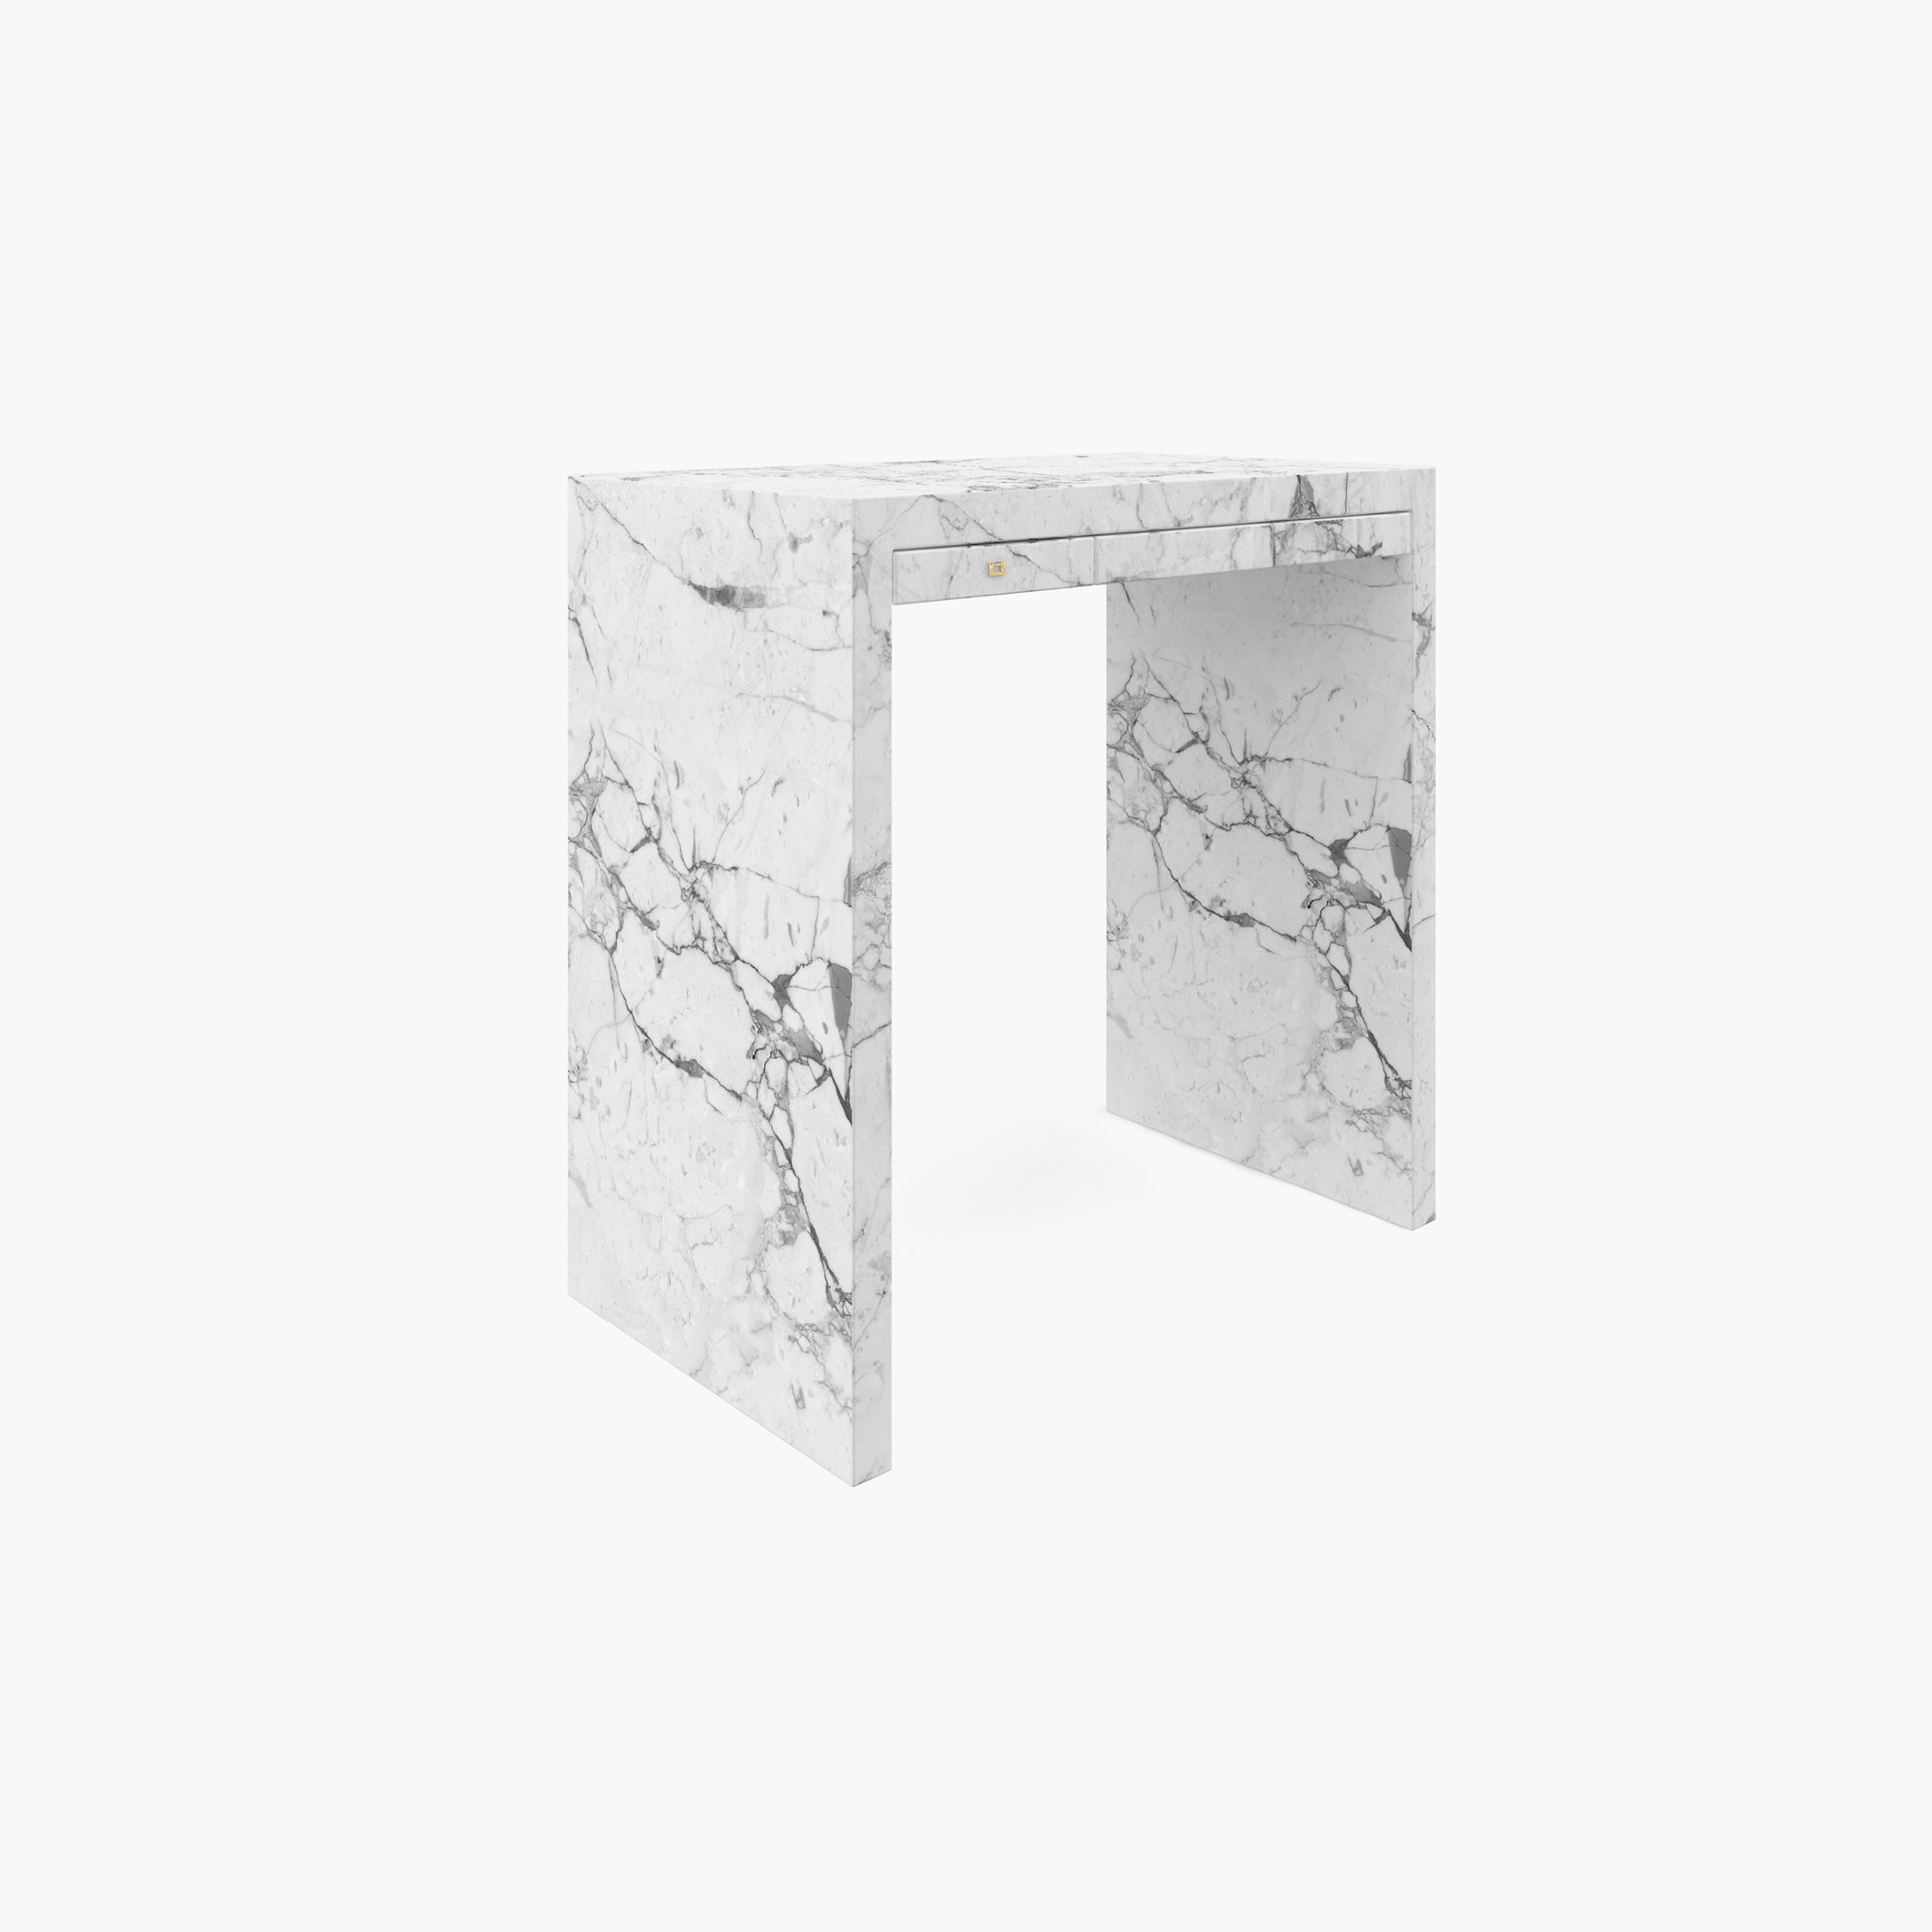 Console drawers White Arabescato Marble unfathomable simplicity Living Room minimalism Consoles  Sideboards FS 28 FELIX SCHWAKE